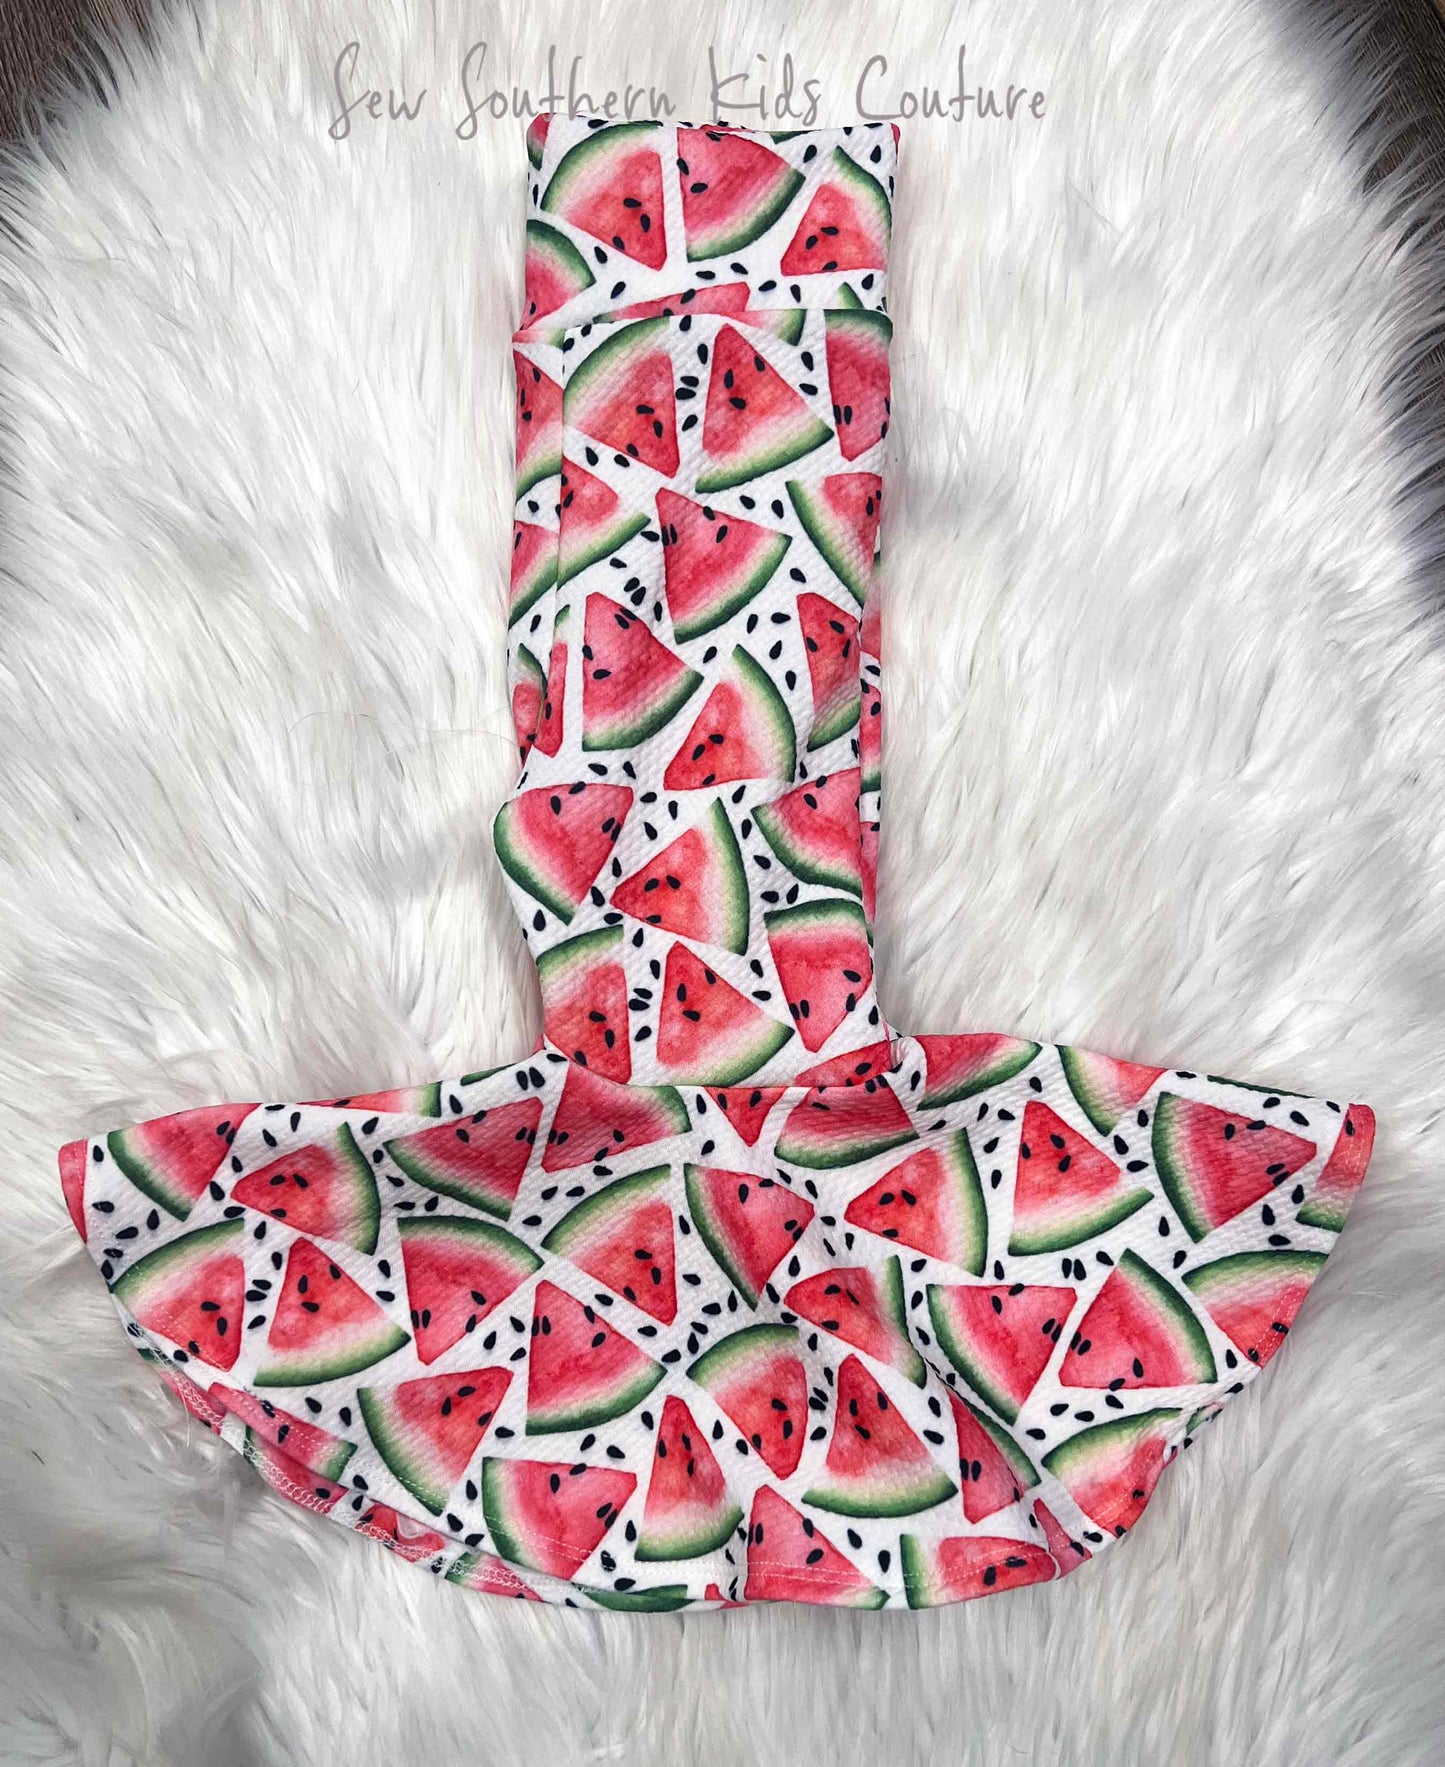 Watermelon Slices Bell Bottoms